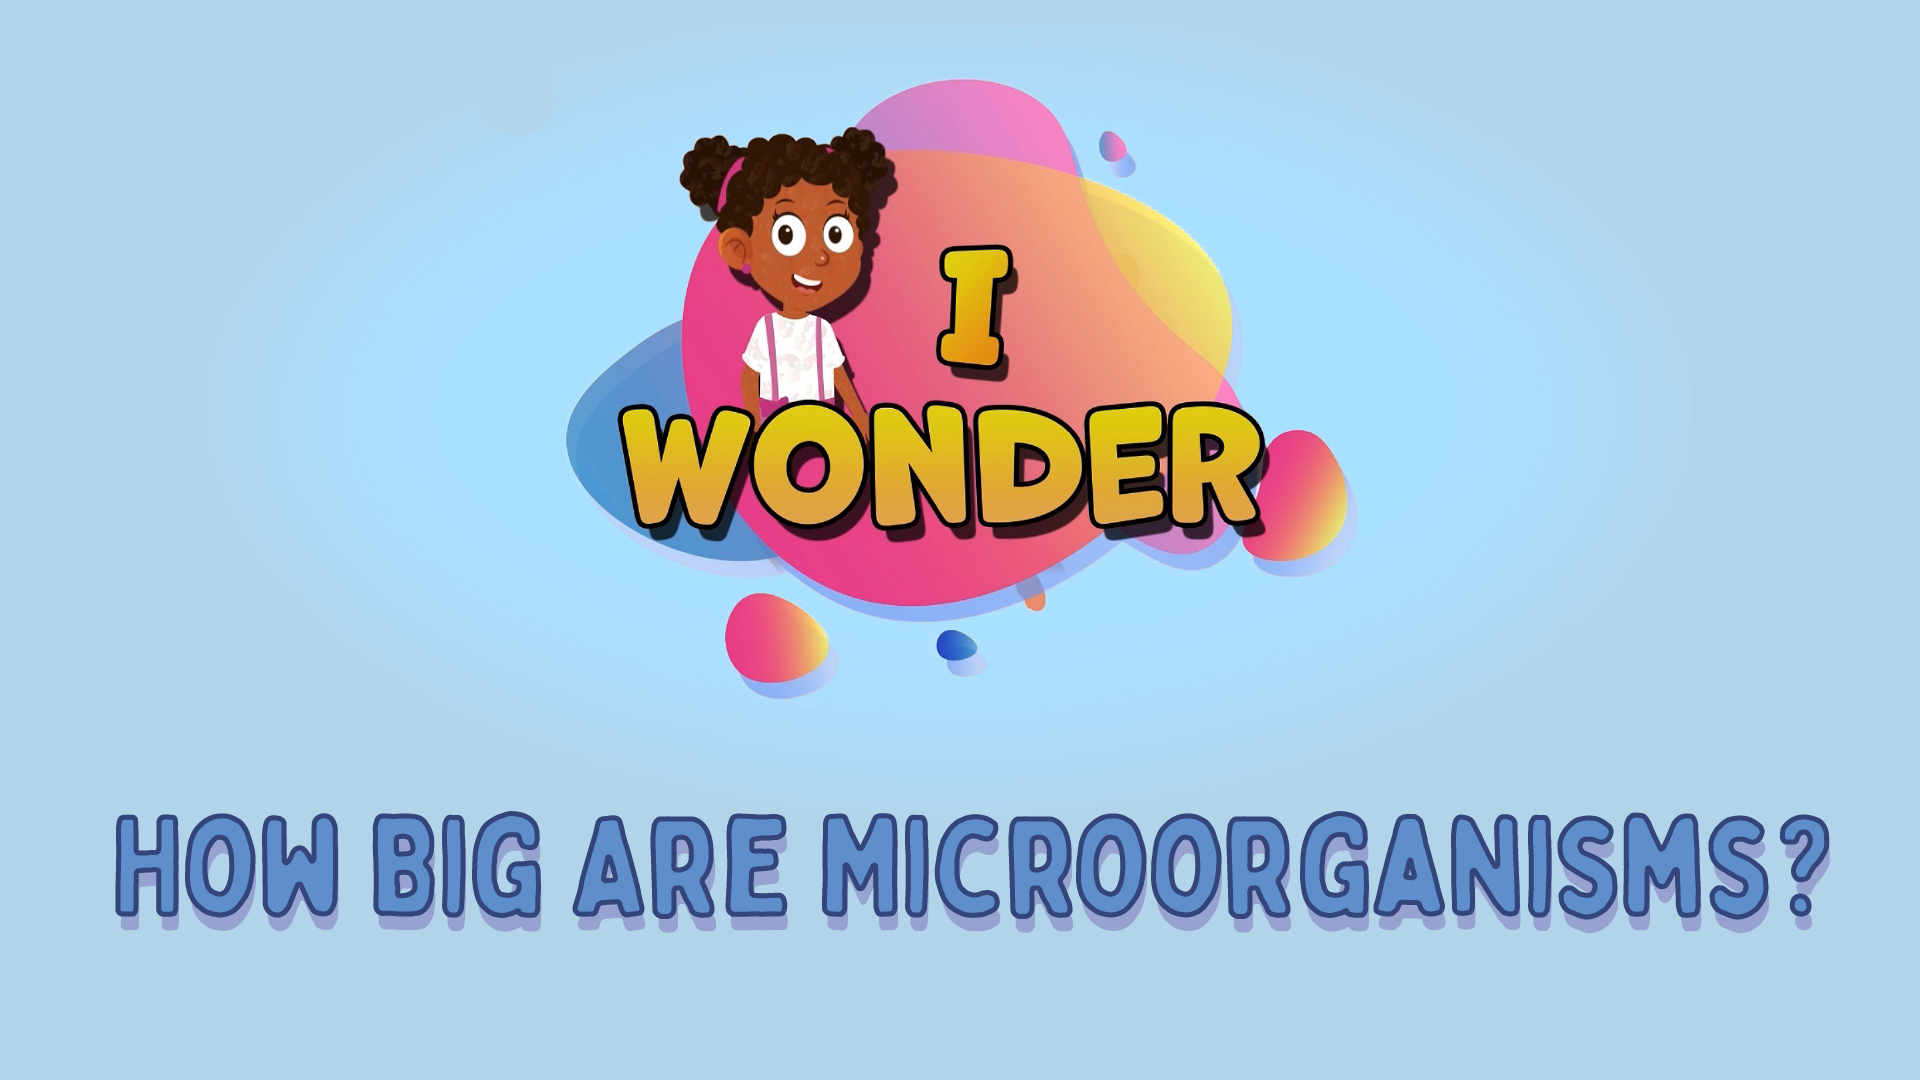 How Big Are Microorganisms?